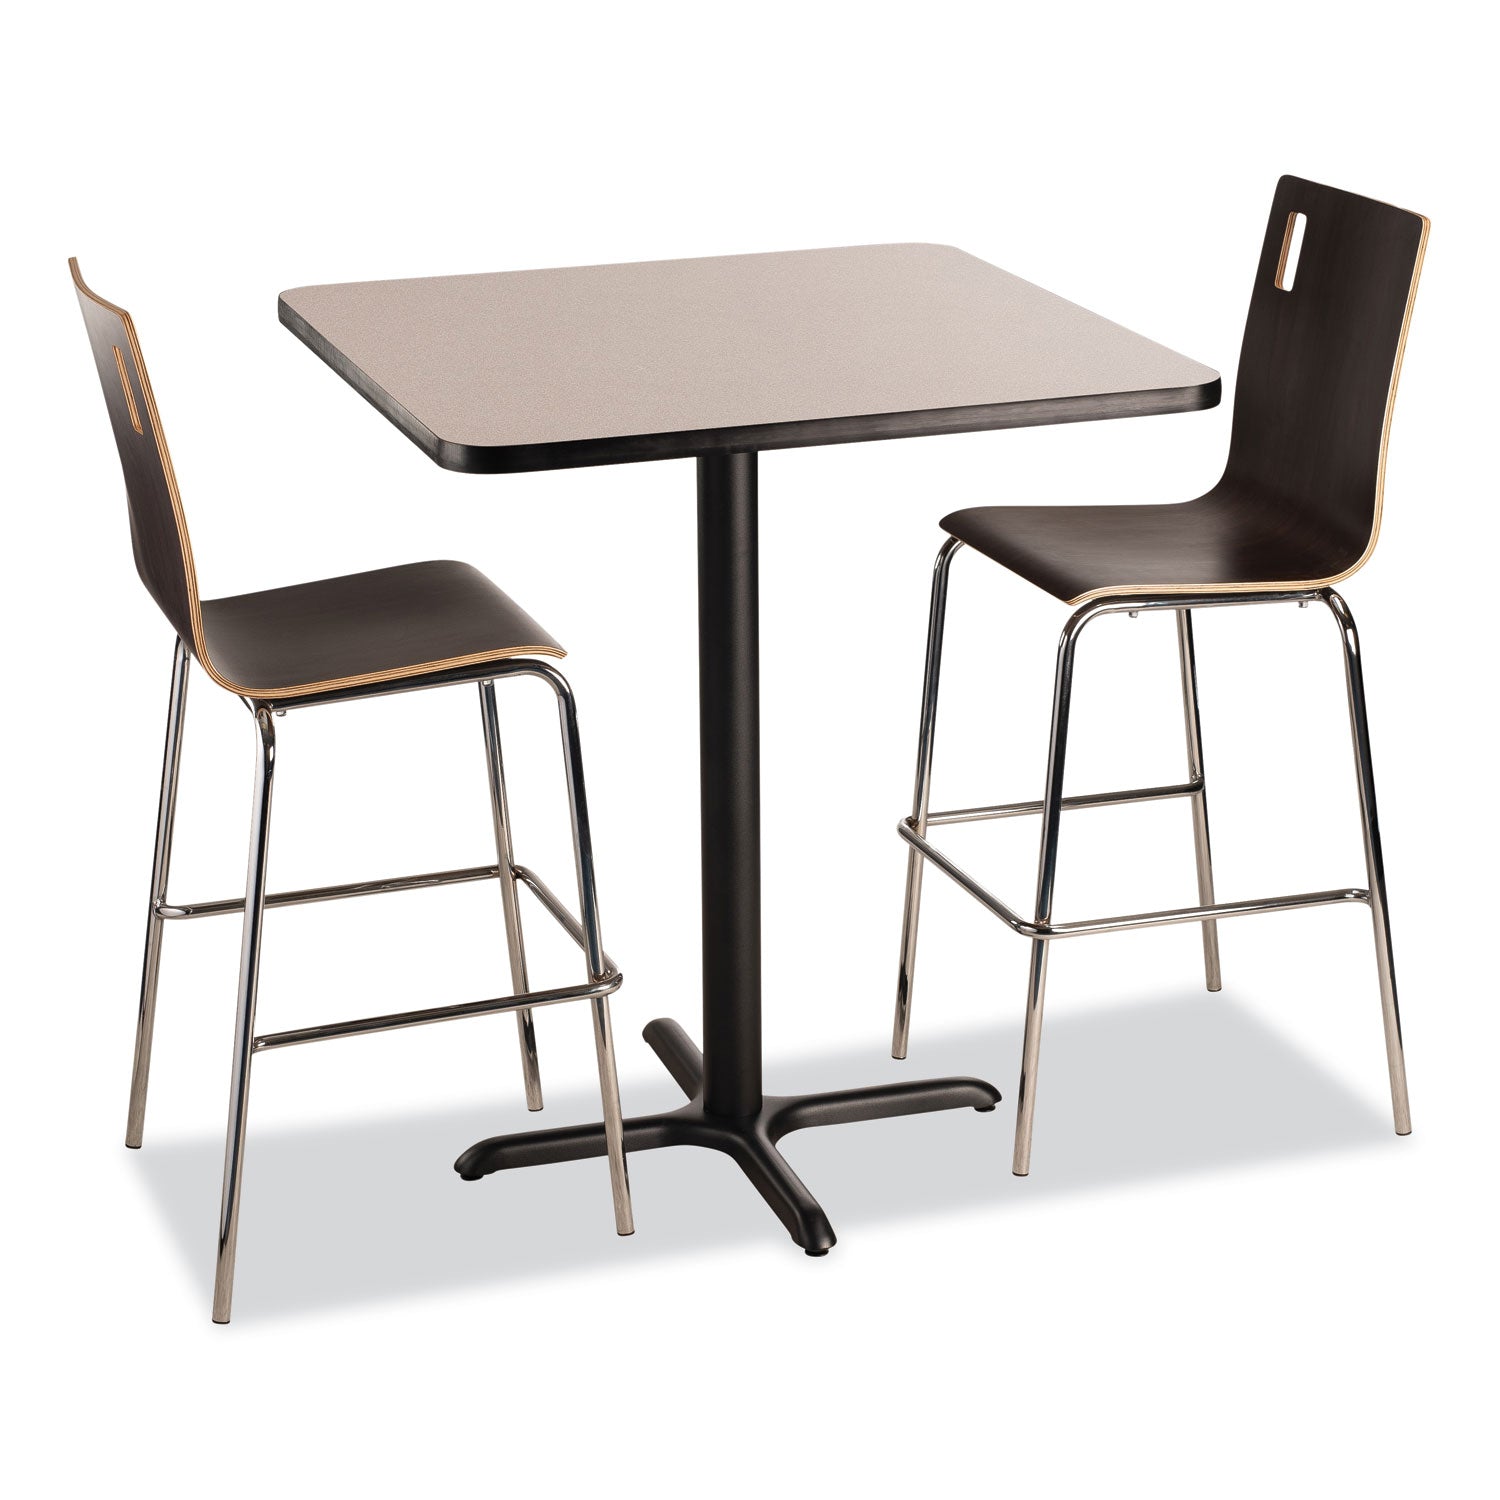 cafe-table-36w-x-36d-x-42h-square-top-x-base-gray-nebula-top-black-base-ships-in-7-10-business-days_npsct33636xb1gy - 4